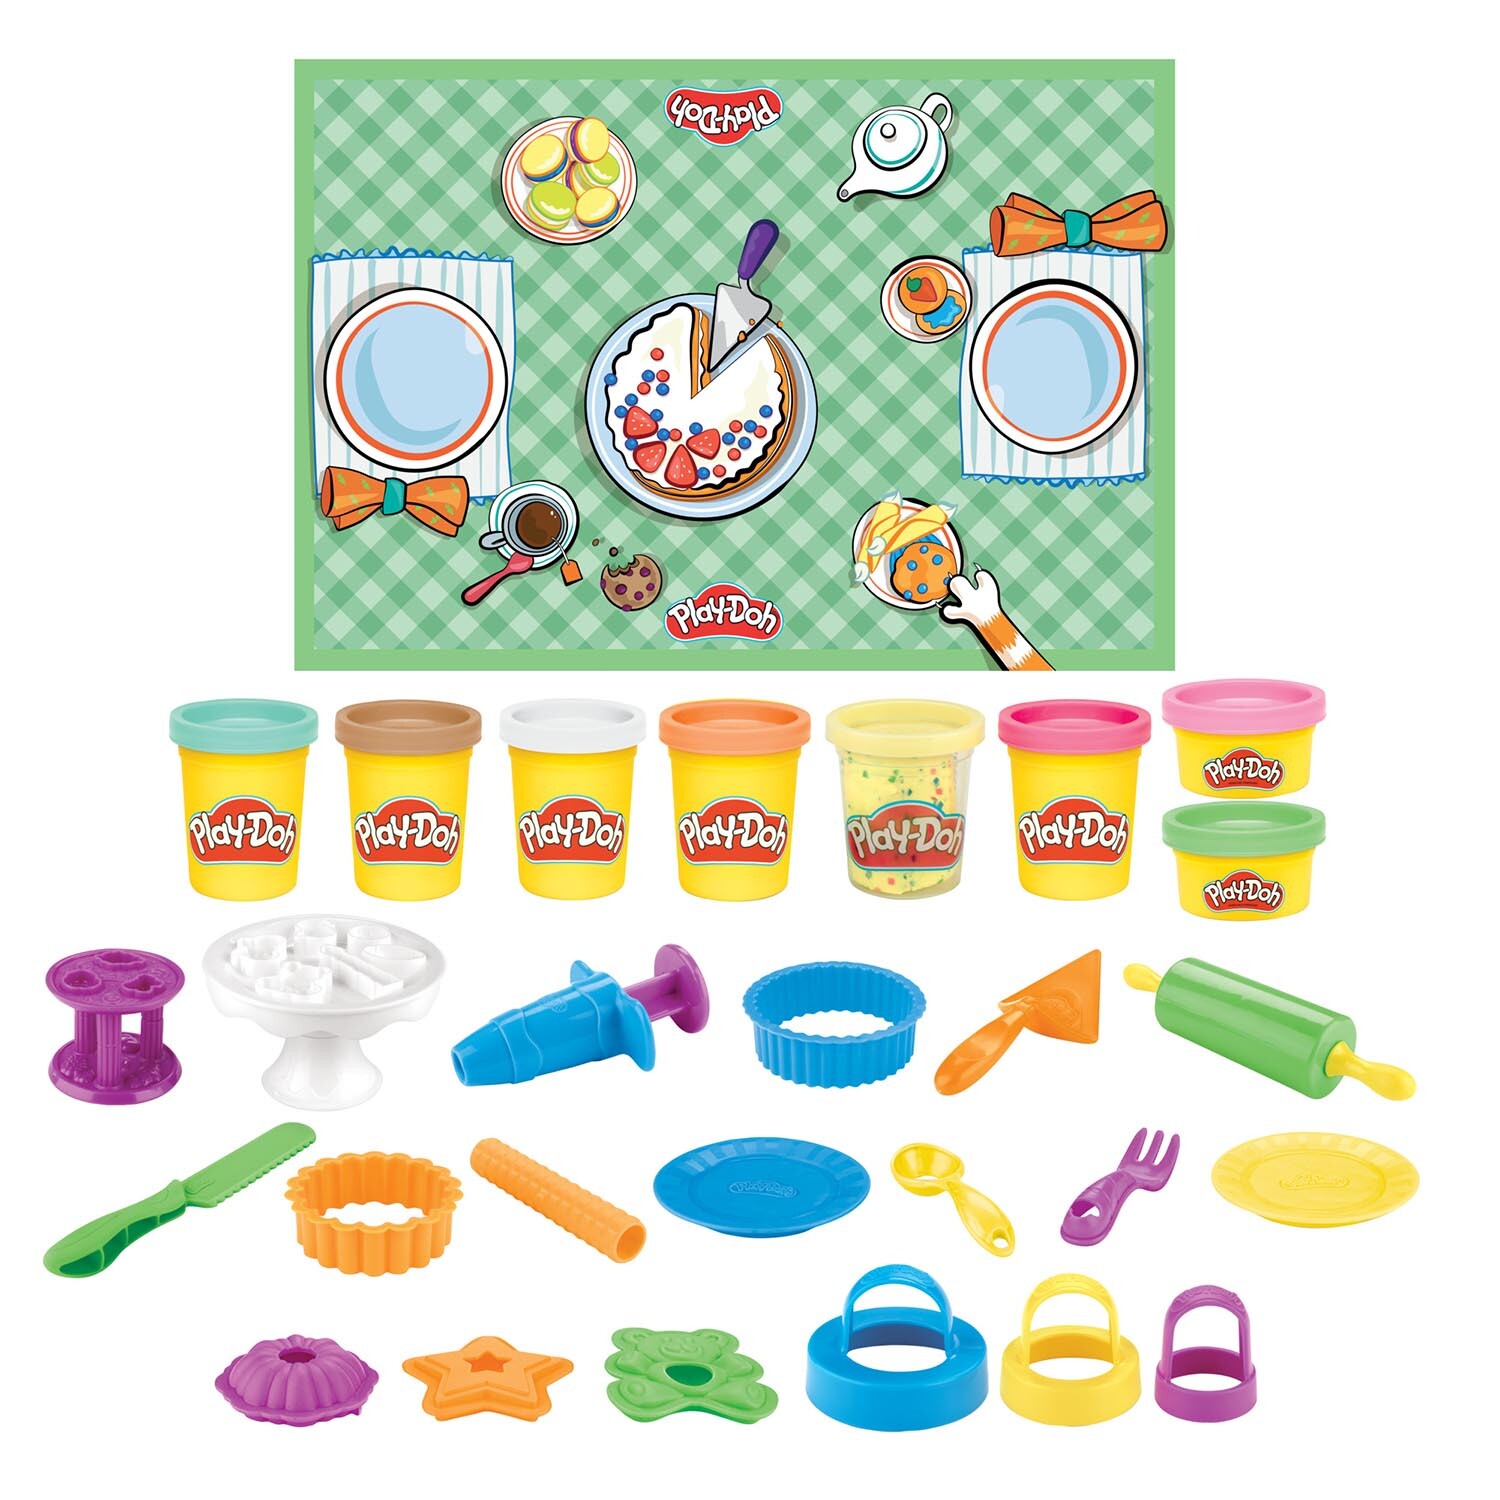 Play-Doh Giftable Playset Image 4